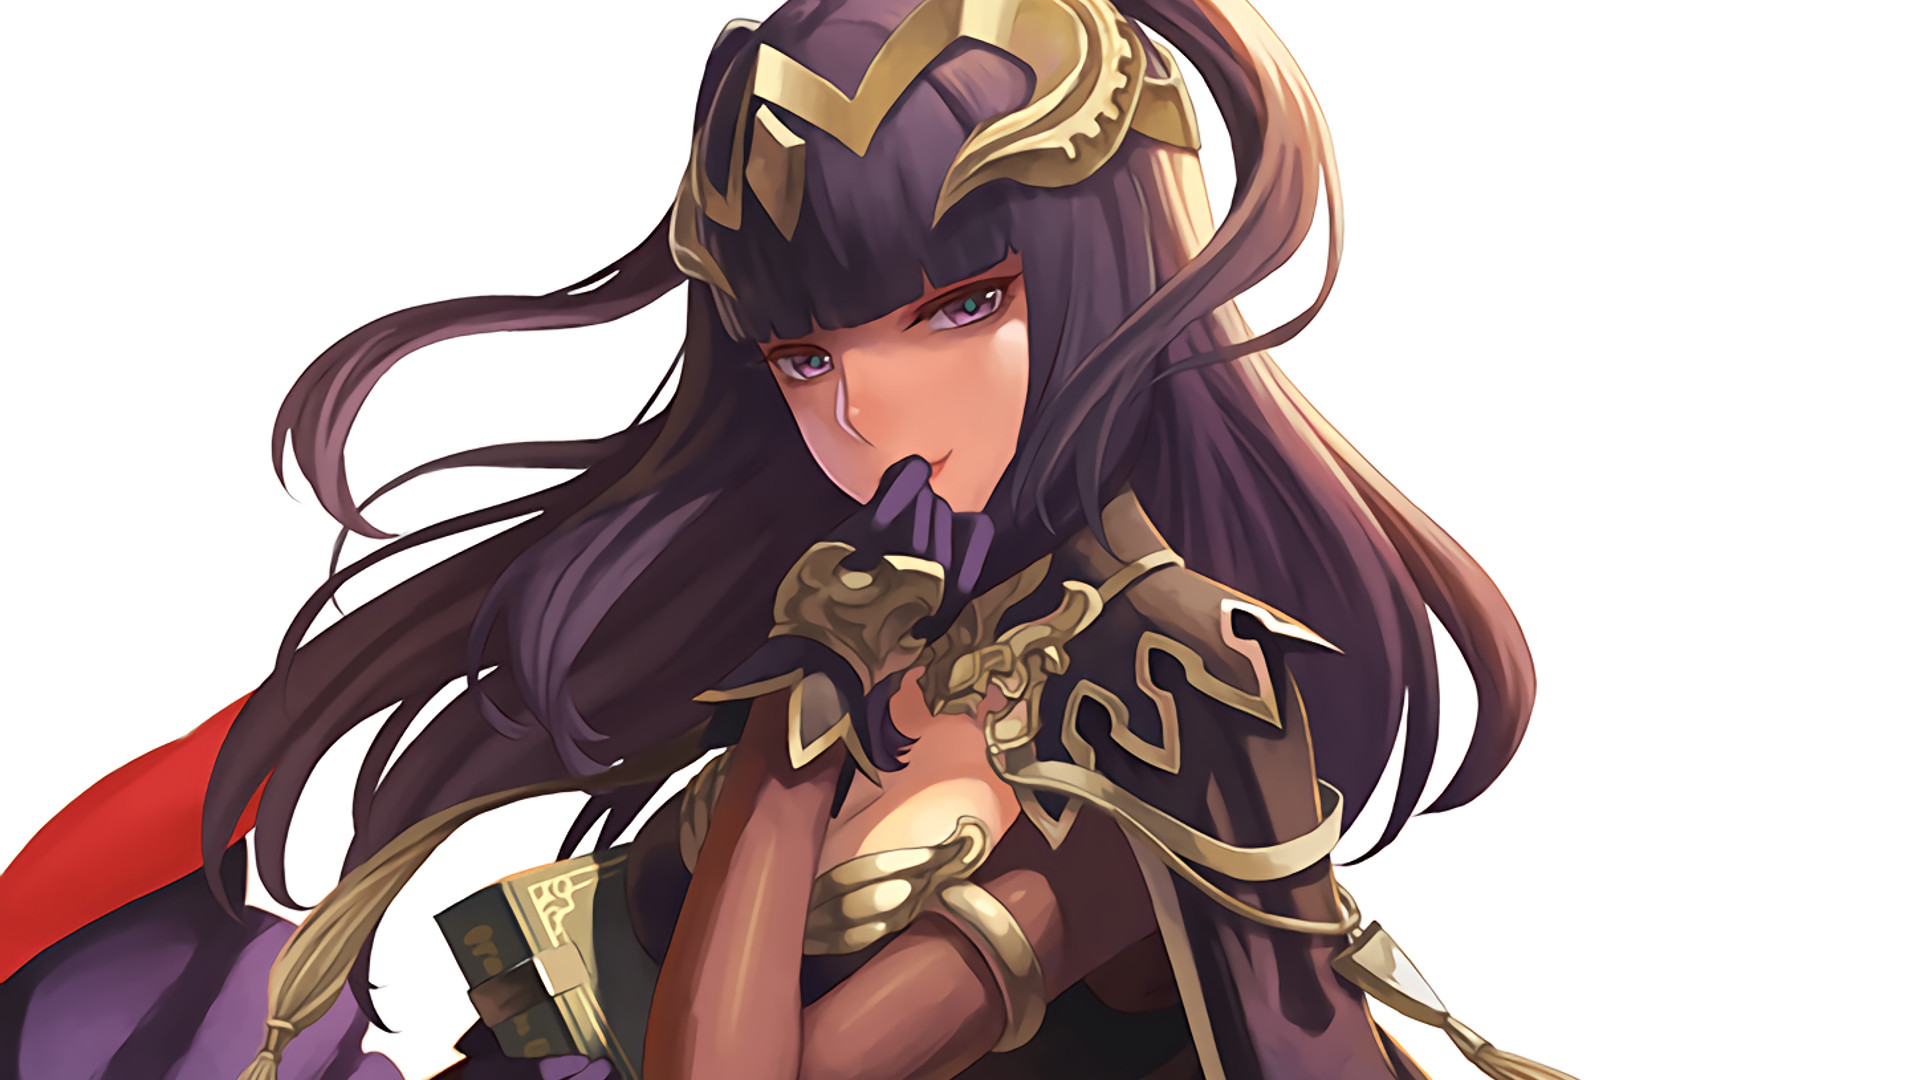 1920x1080 Gallery Fire Emblem Awakening Wallpaper Tharja: Can some one make the back  ground black? Tharja [Fire ... Fire